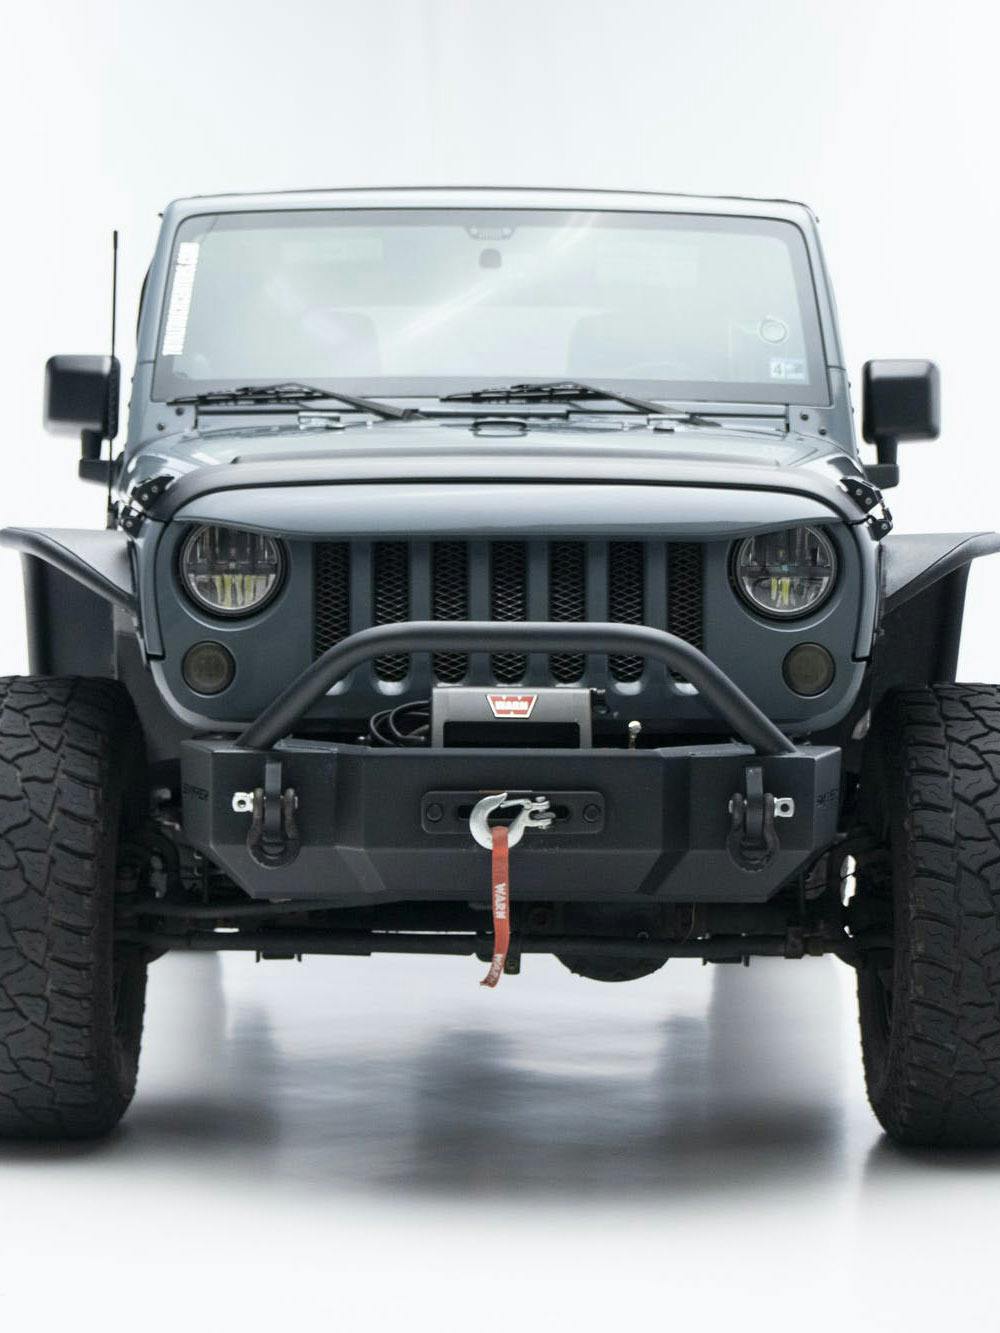 https://aw1.imgix.net/aw/_content/site/alamo/_IMAGES/jeep-landing/jeep-winches.jpg